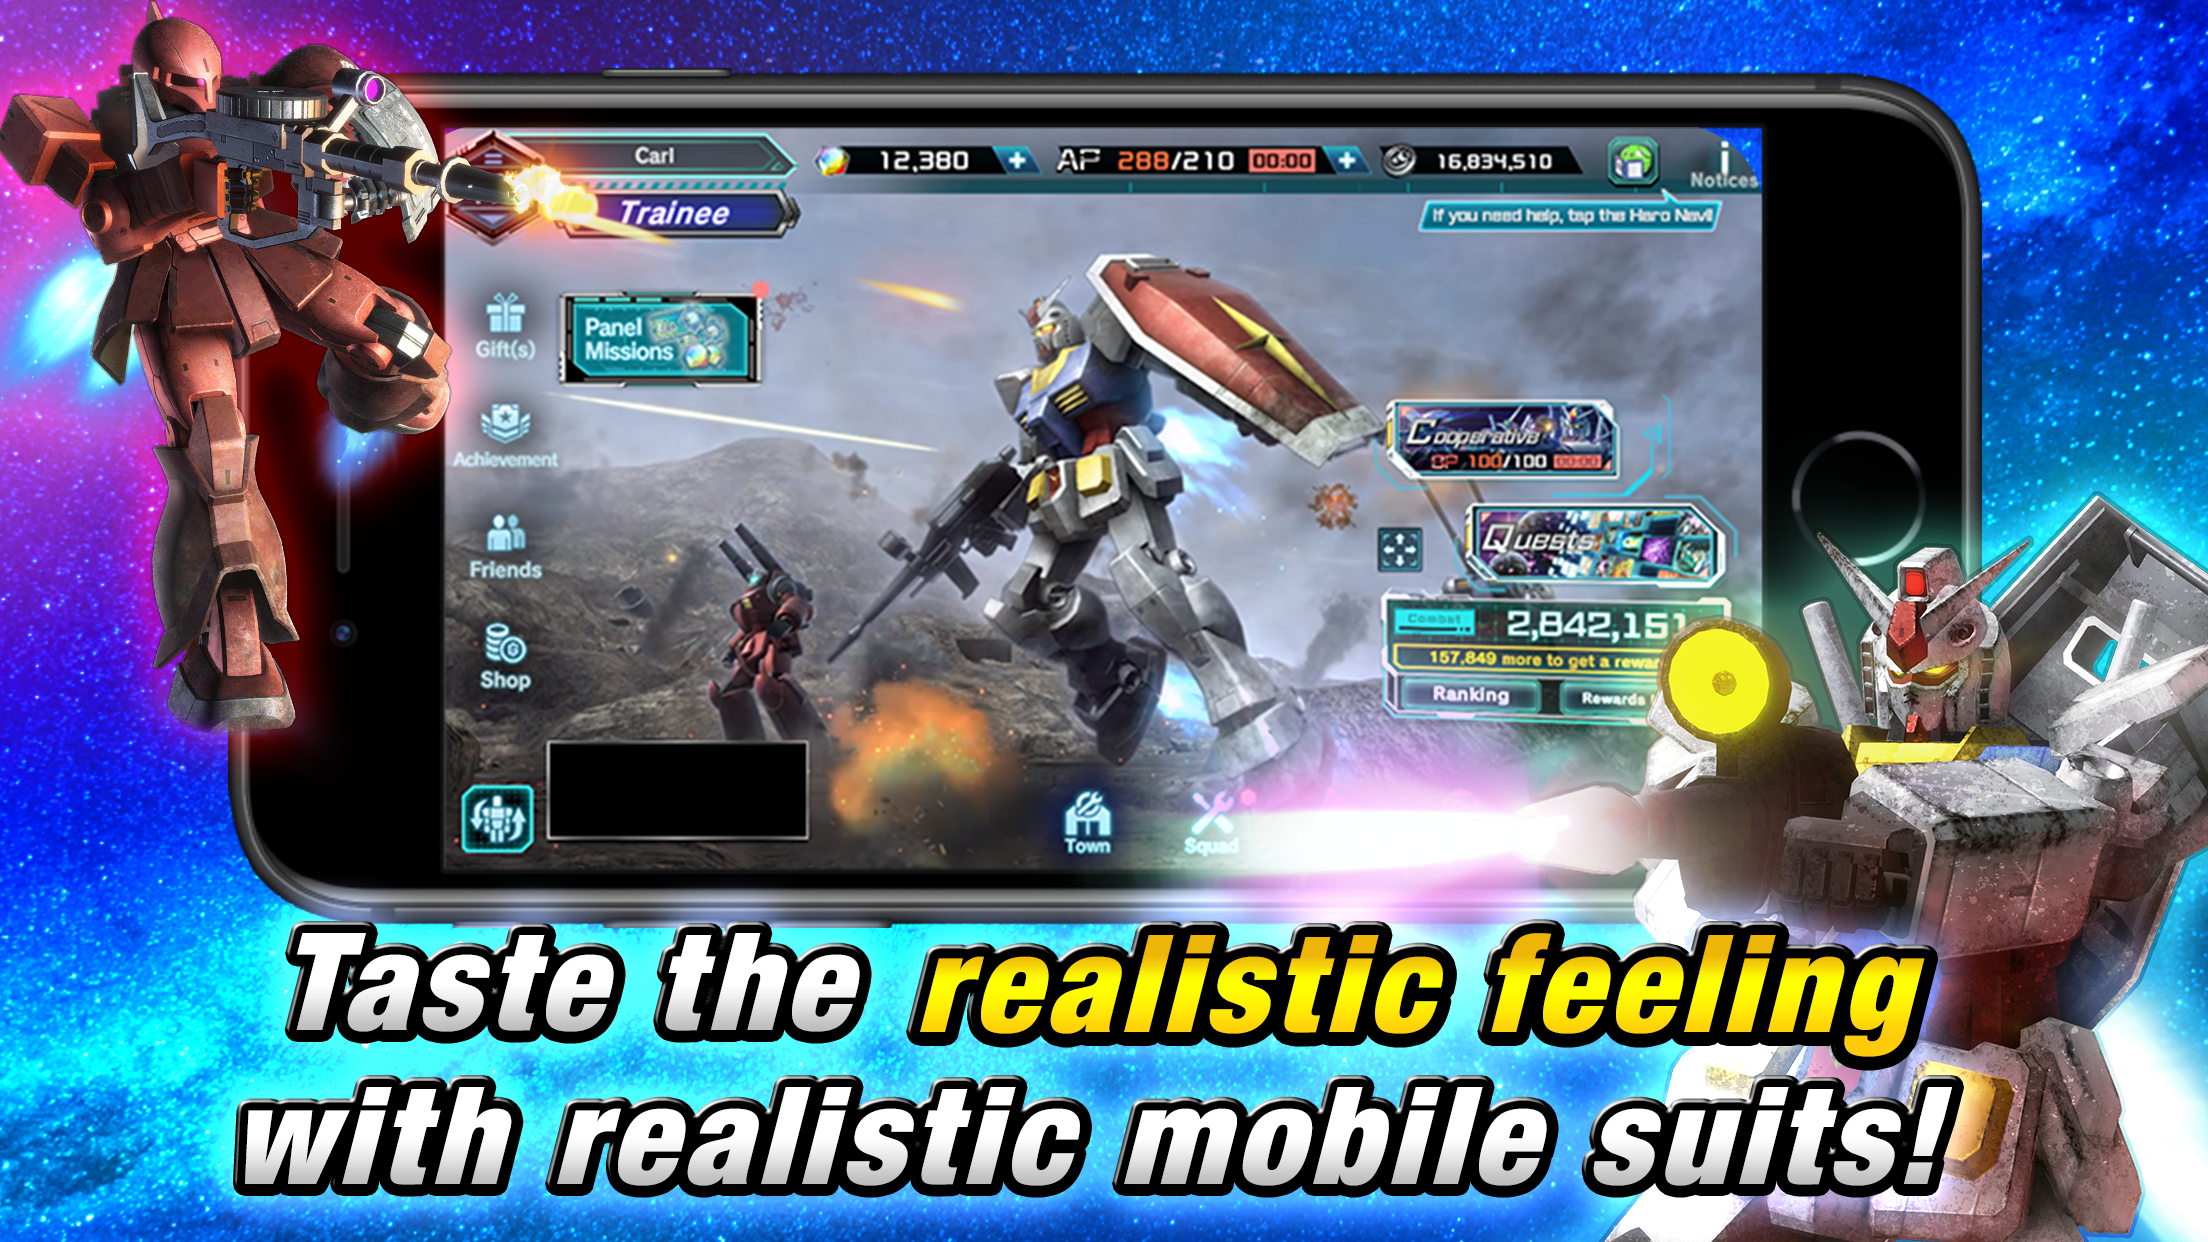 Gundam Mobile games. Does anyone know of decent games for Android